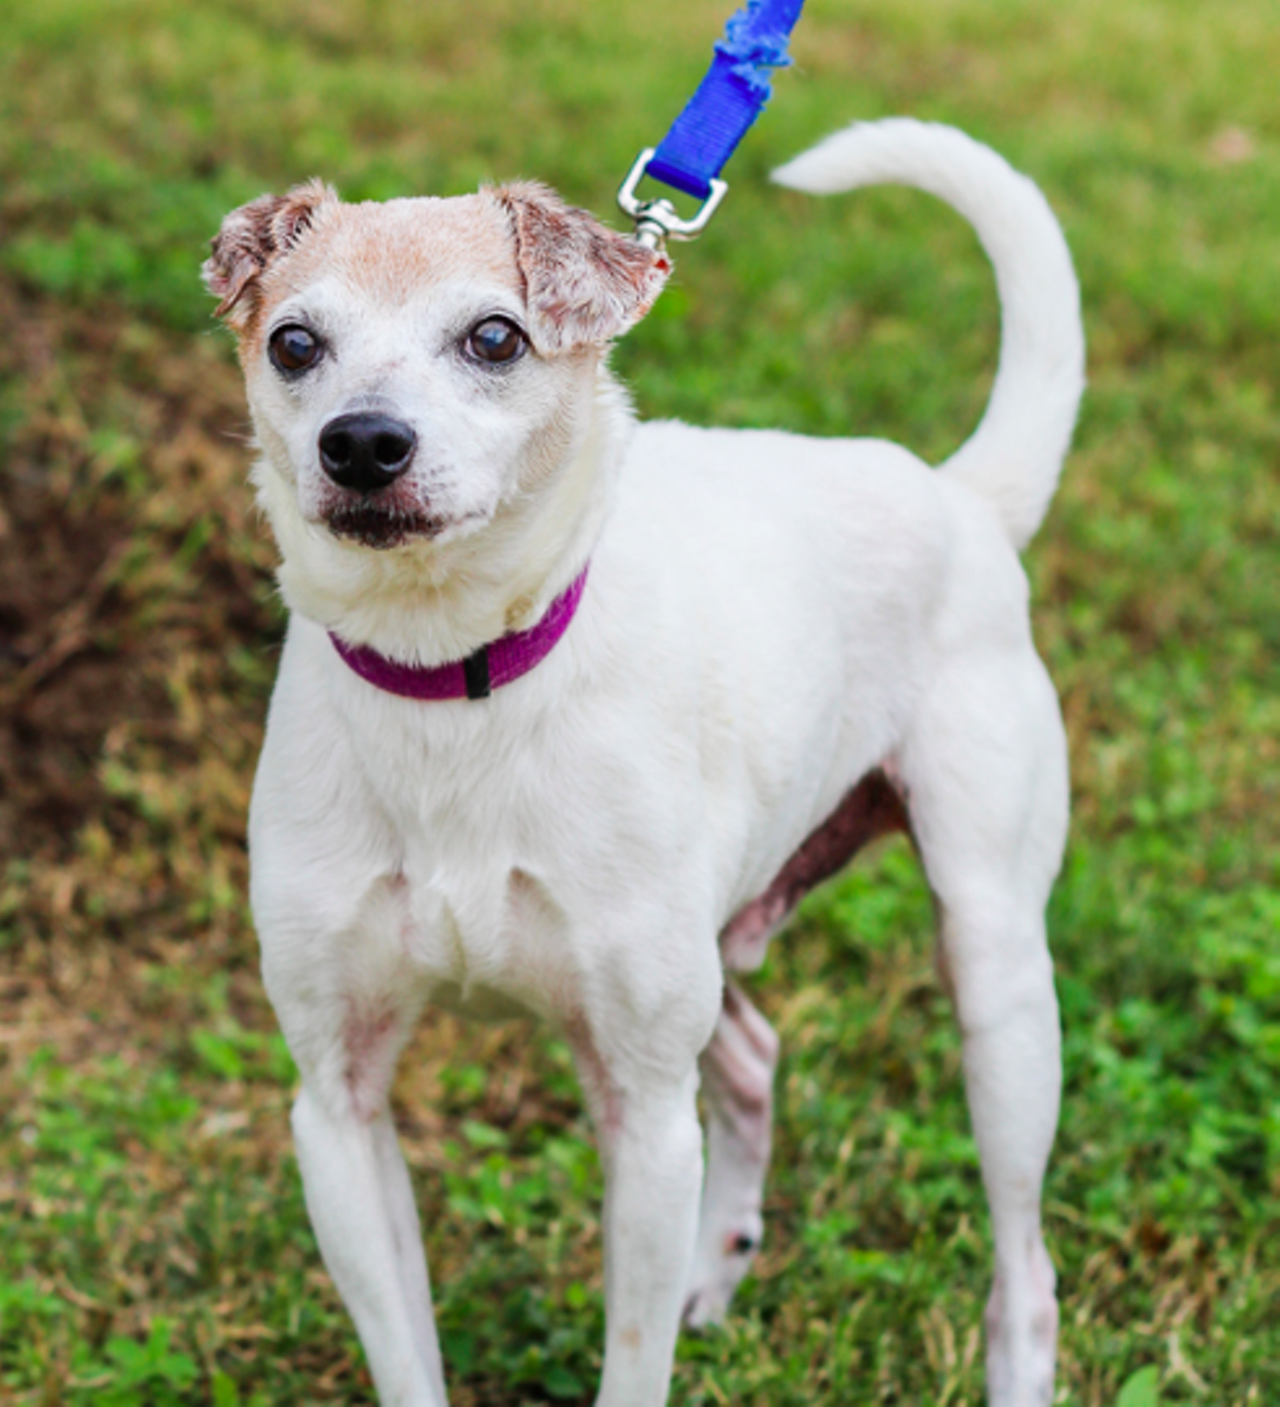 Tatum
"Hi guys! They call me Tatum! I am a fun friendly little guy who loves nothing more than to hang out with everyone. I love making new friends and having as many human pals as I can get! We should get to know each other better so we can become the best of friends!"